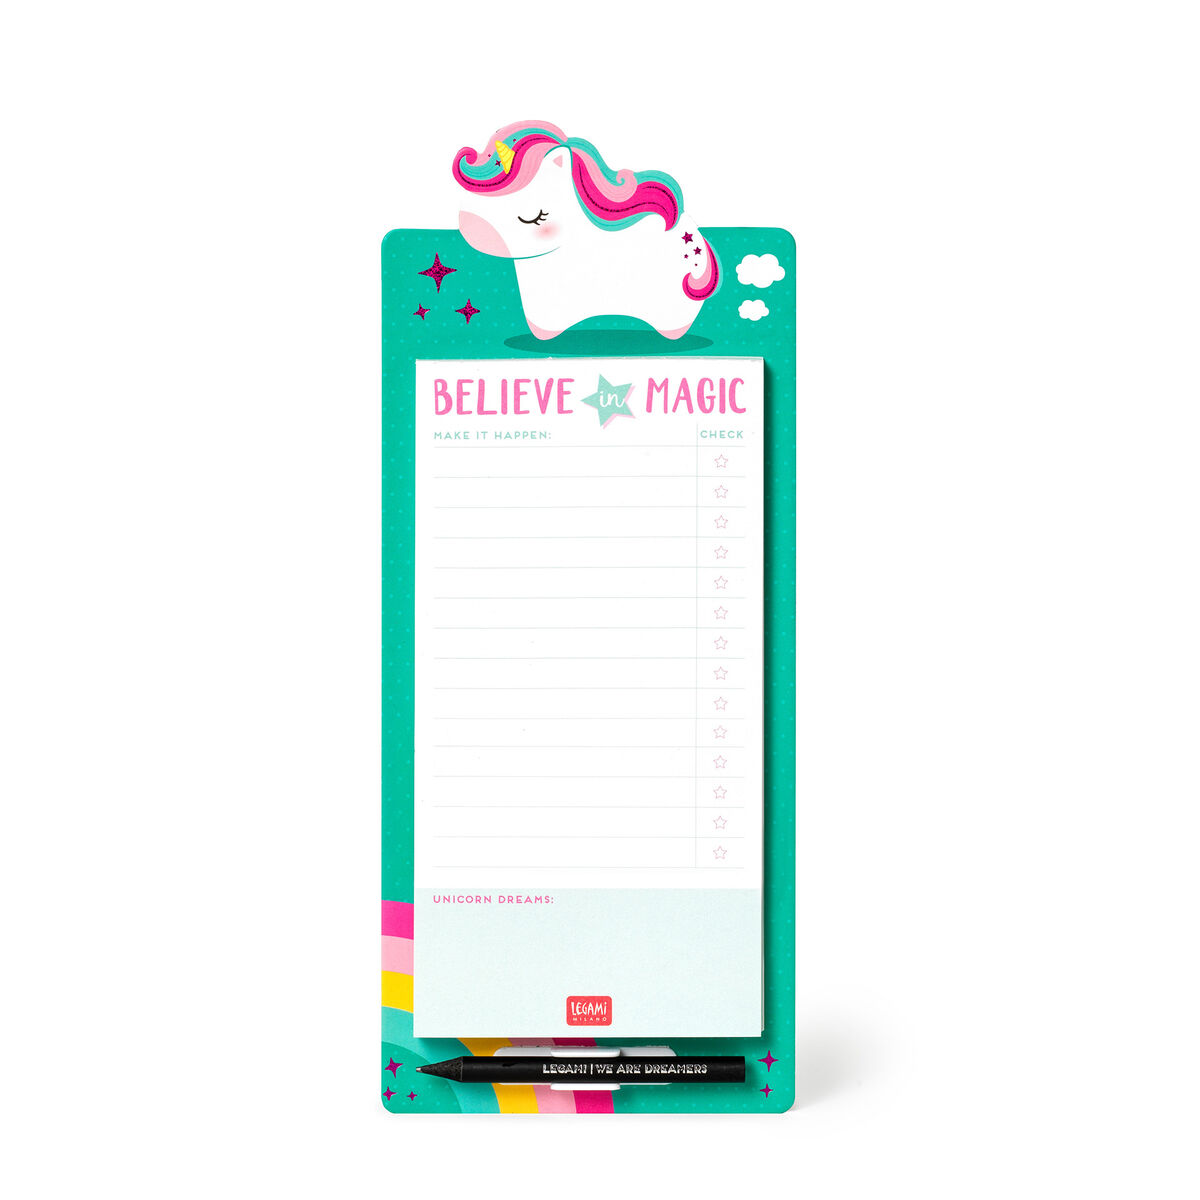 Magnetic Notepad - Don't Forget, , zoo